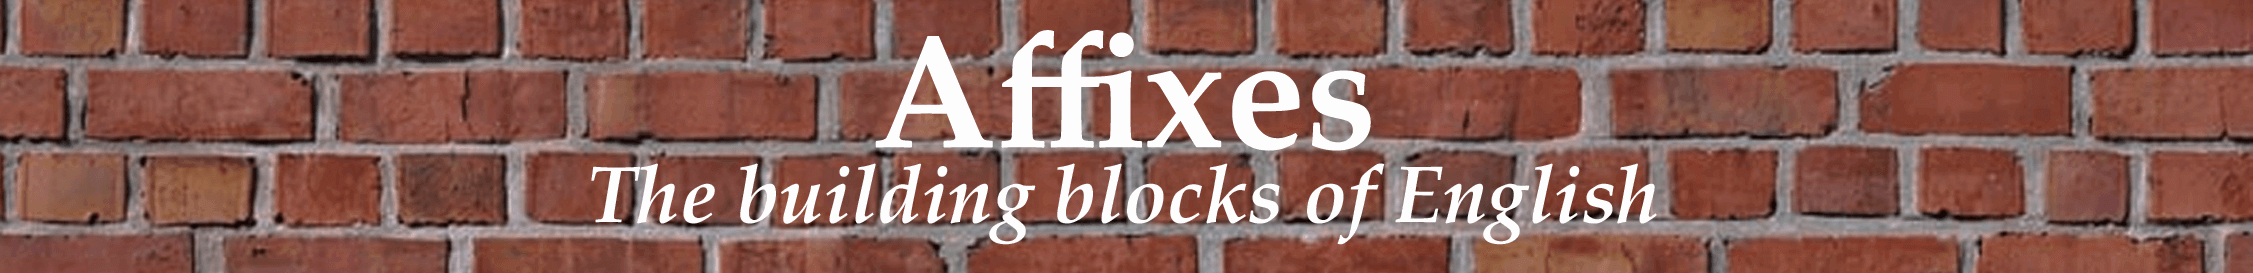 Header image of wall of bricks with affixes